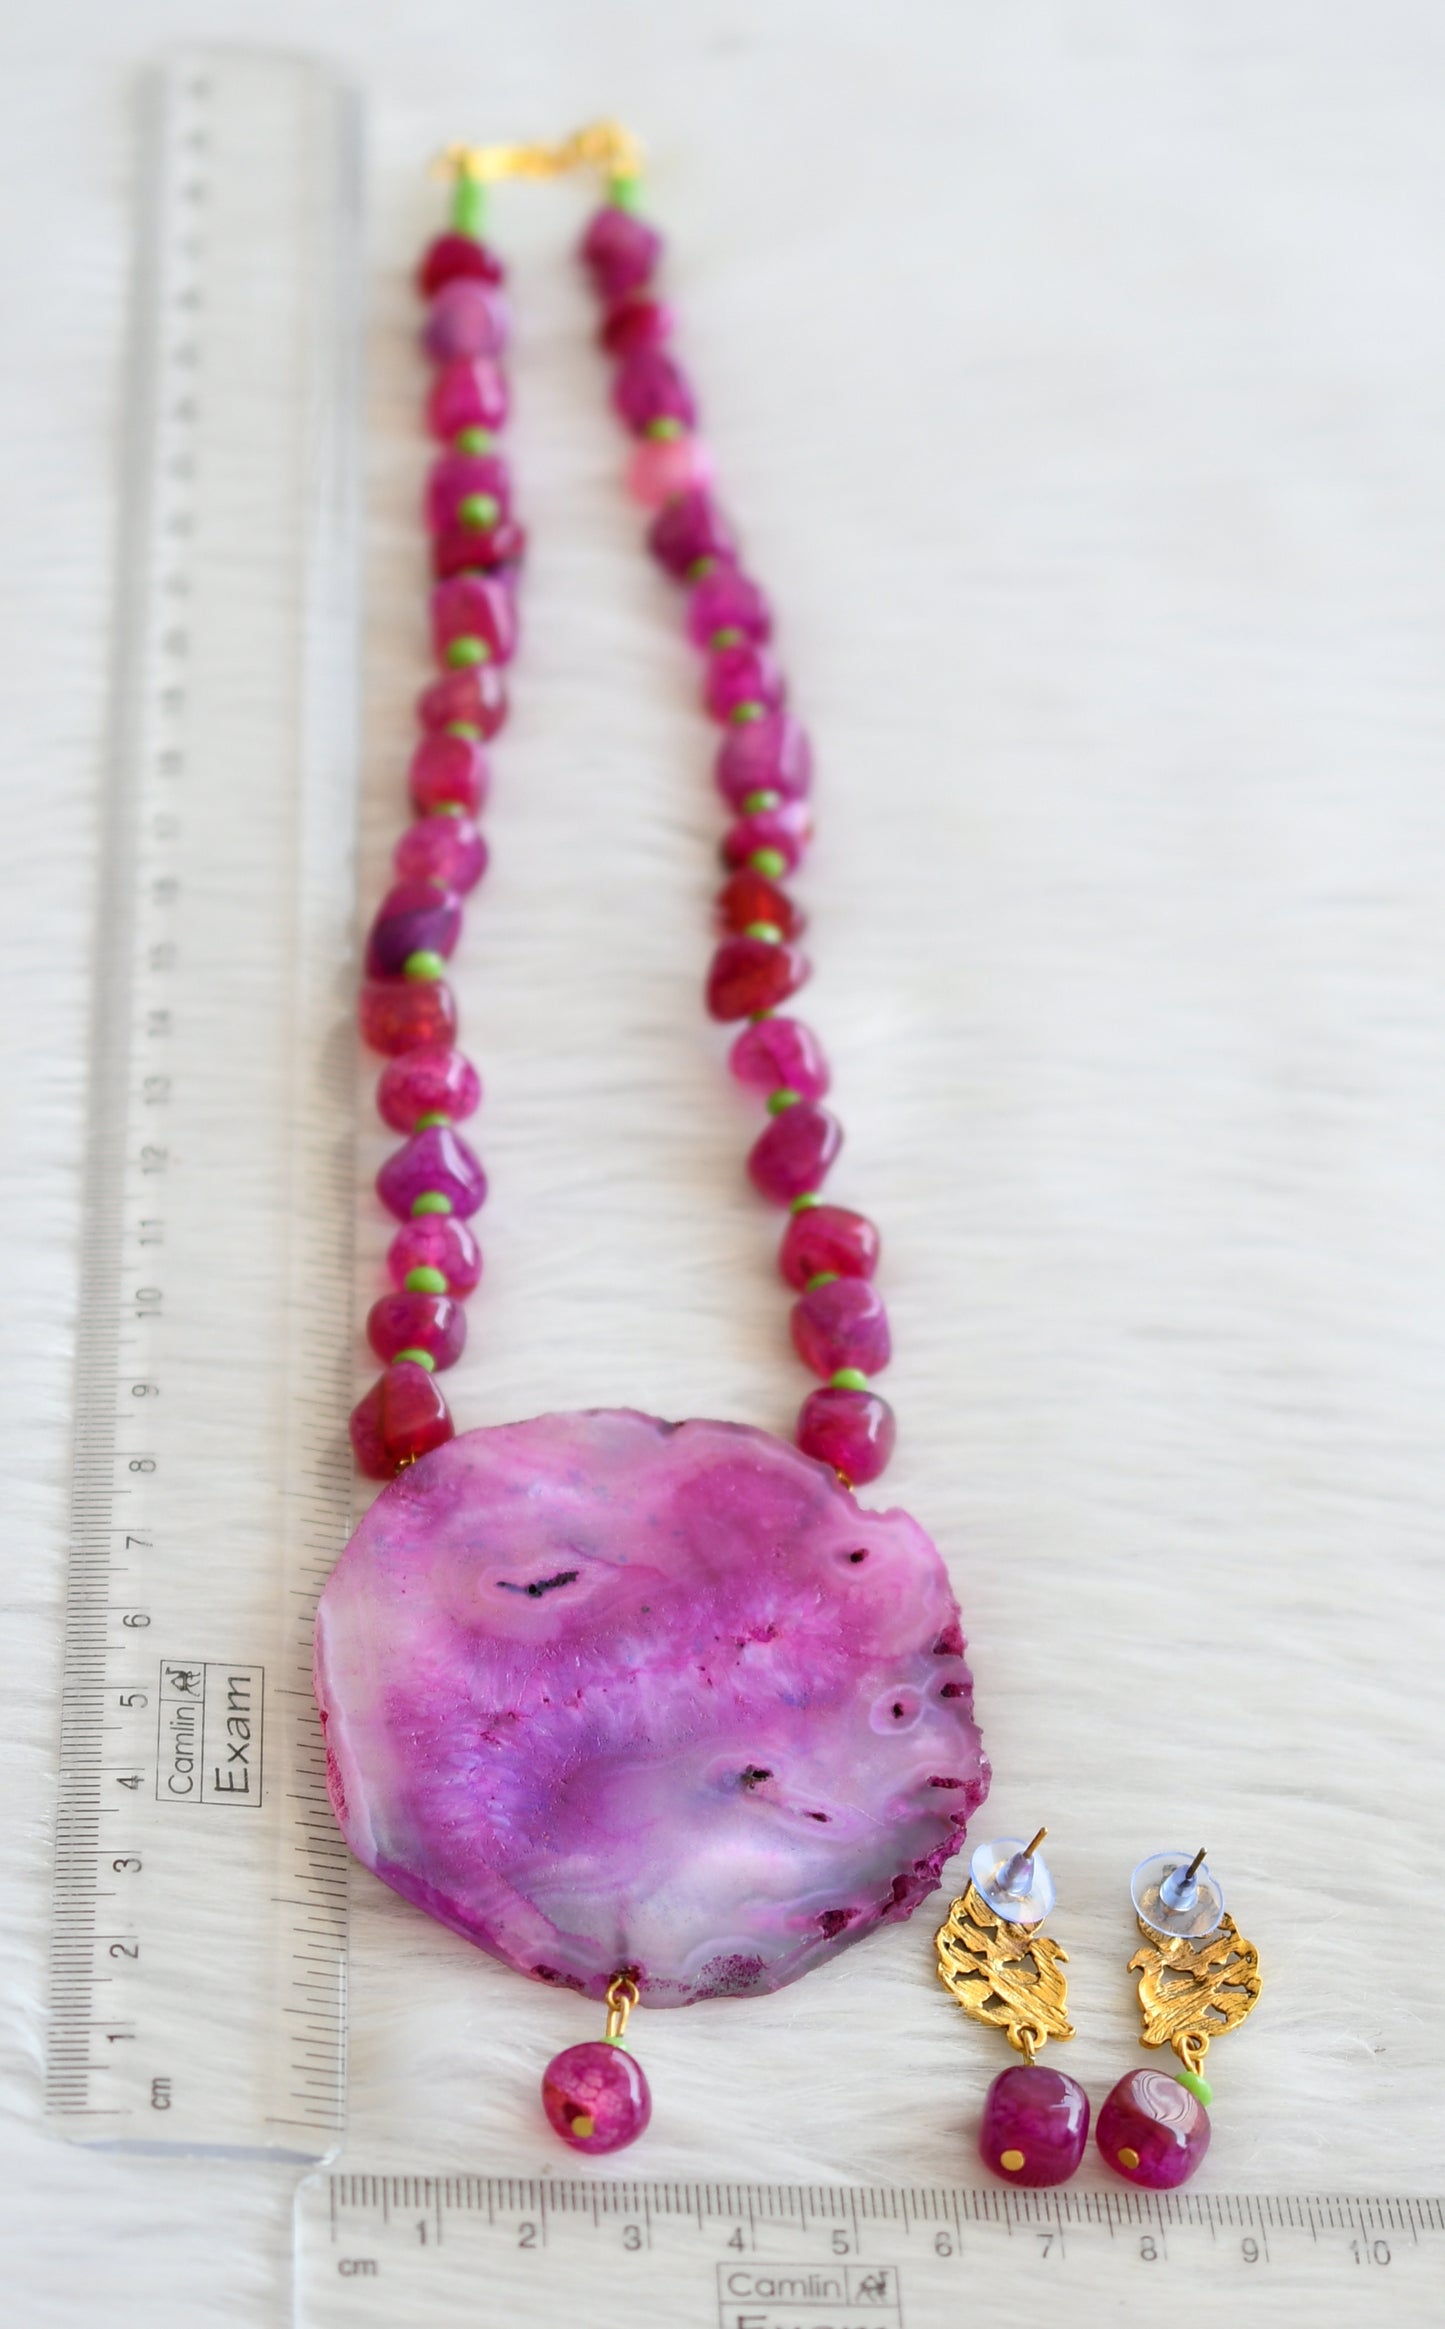 Hand painted radha-krishna sliced agate pendant with pink-green onyx beaded necklace set dj-45661